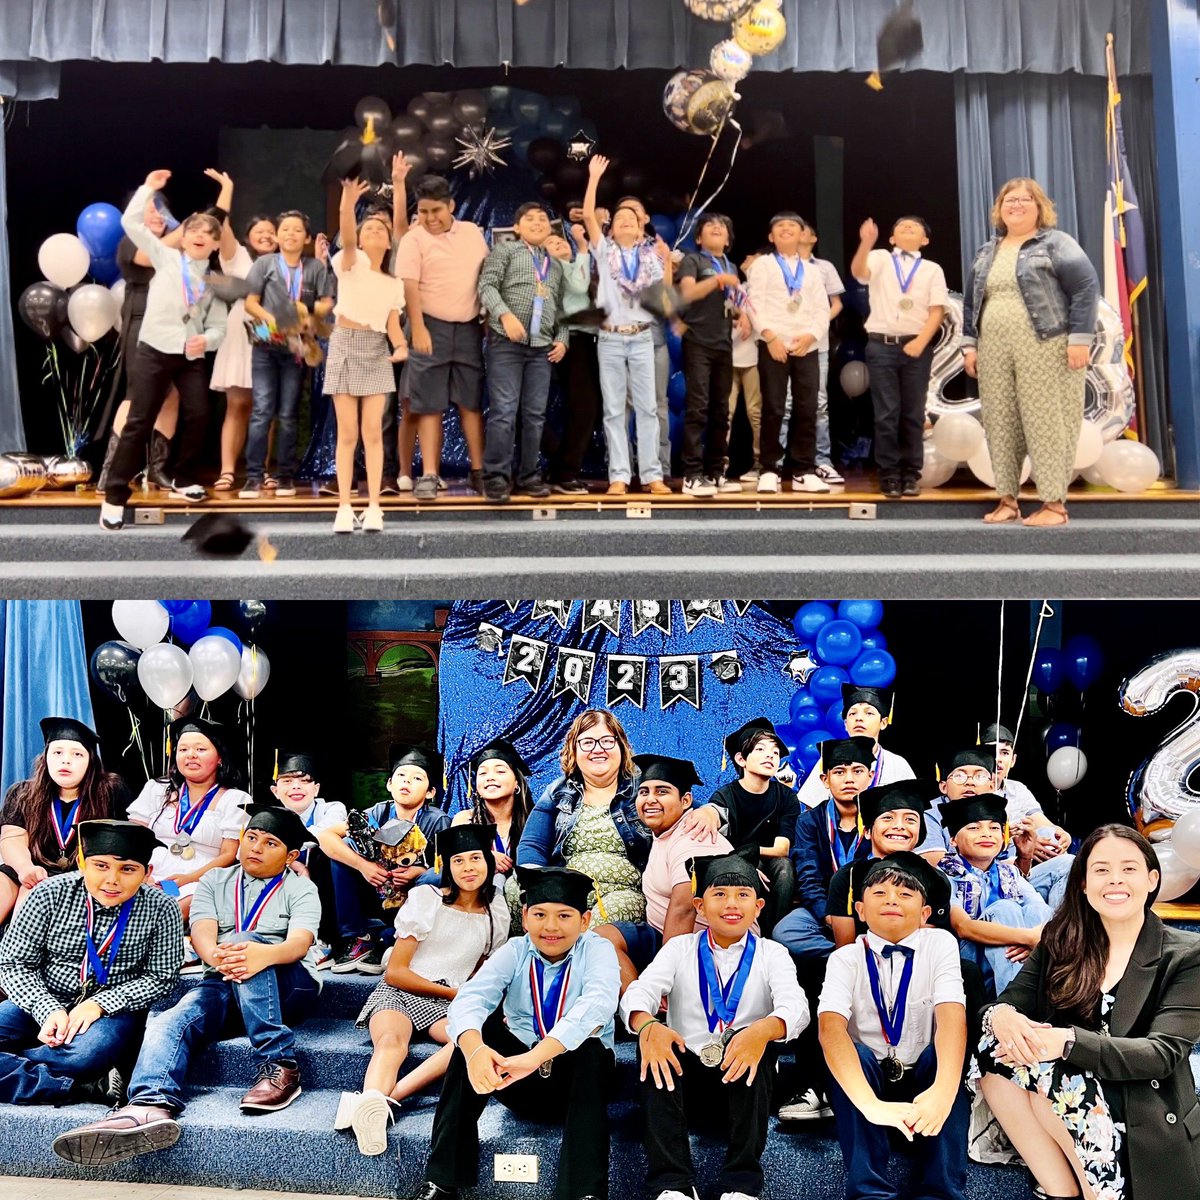 We celebrated my first set of 5th/6th graders moving on to middle school. We’ve had a blast this year & they have learned a lot, but the most important part is all the great memories they get to take with them. @JHoustonElem #AISDmultilingual #AISDElementary #AISDjoy #AustinISD